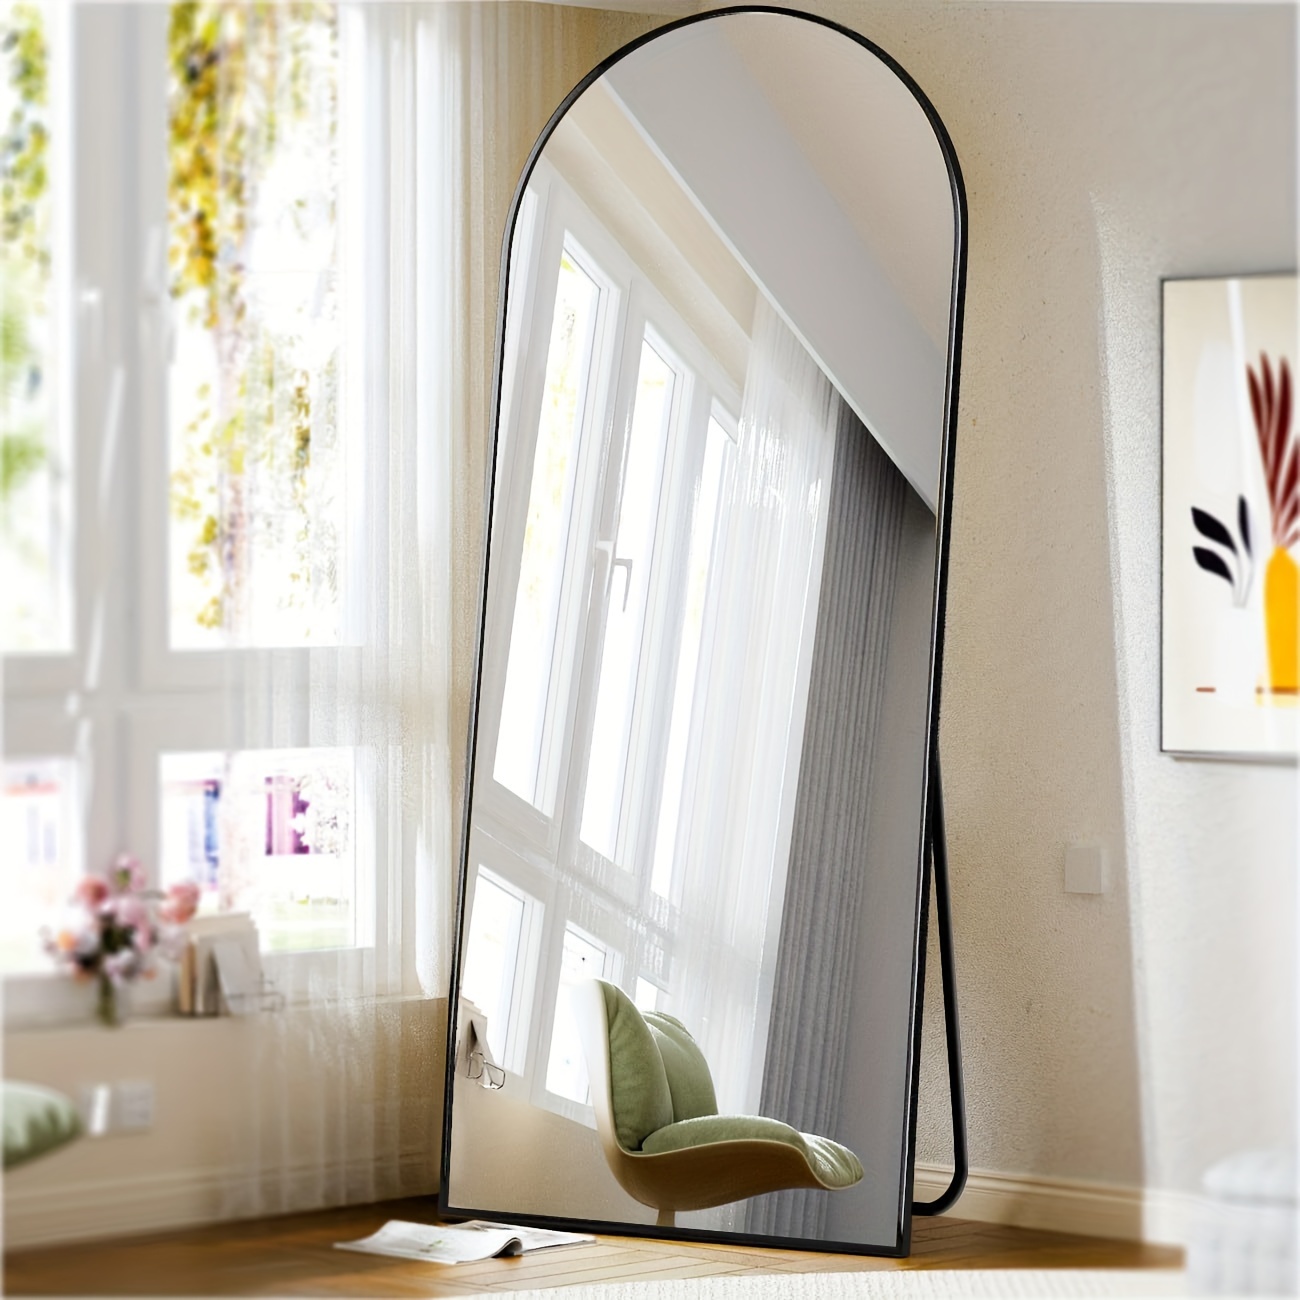 

71"x 26" Arch Full Length Mirror, Wall Mirror Floor Mirror With Stand Hanging Or Leaning, Aluminum Alloy Frame Full Body Mirror For Bedroom, Dressing Room